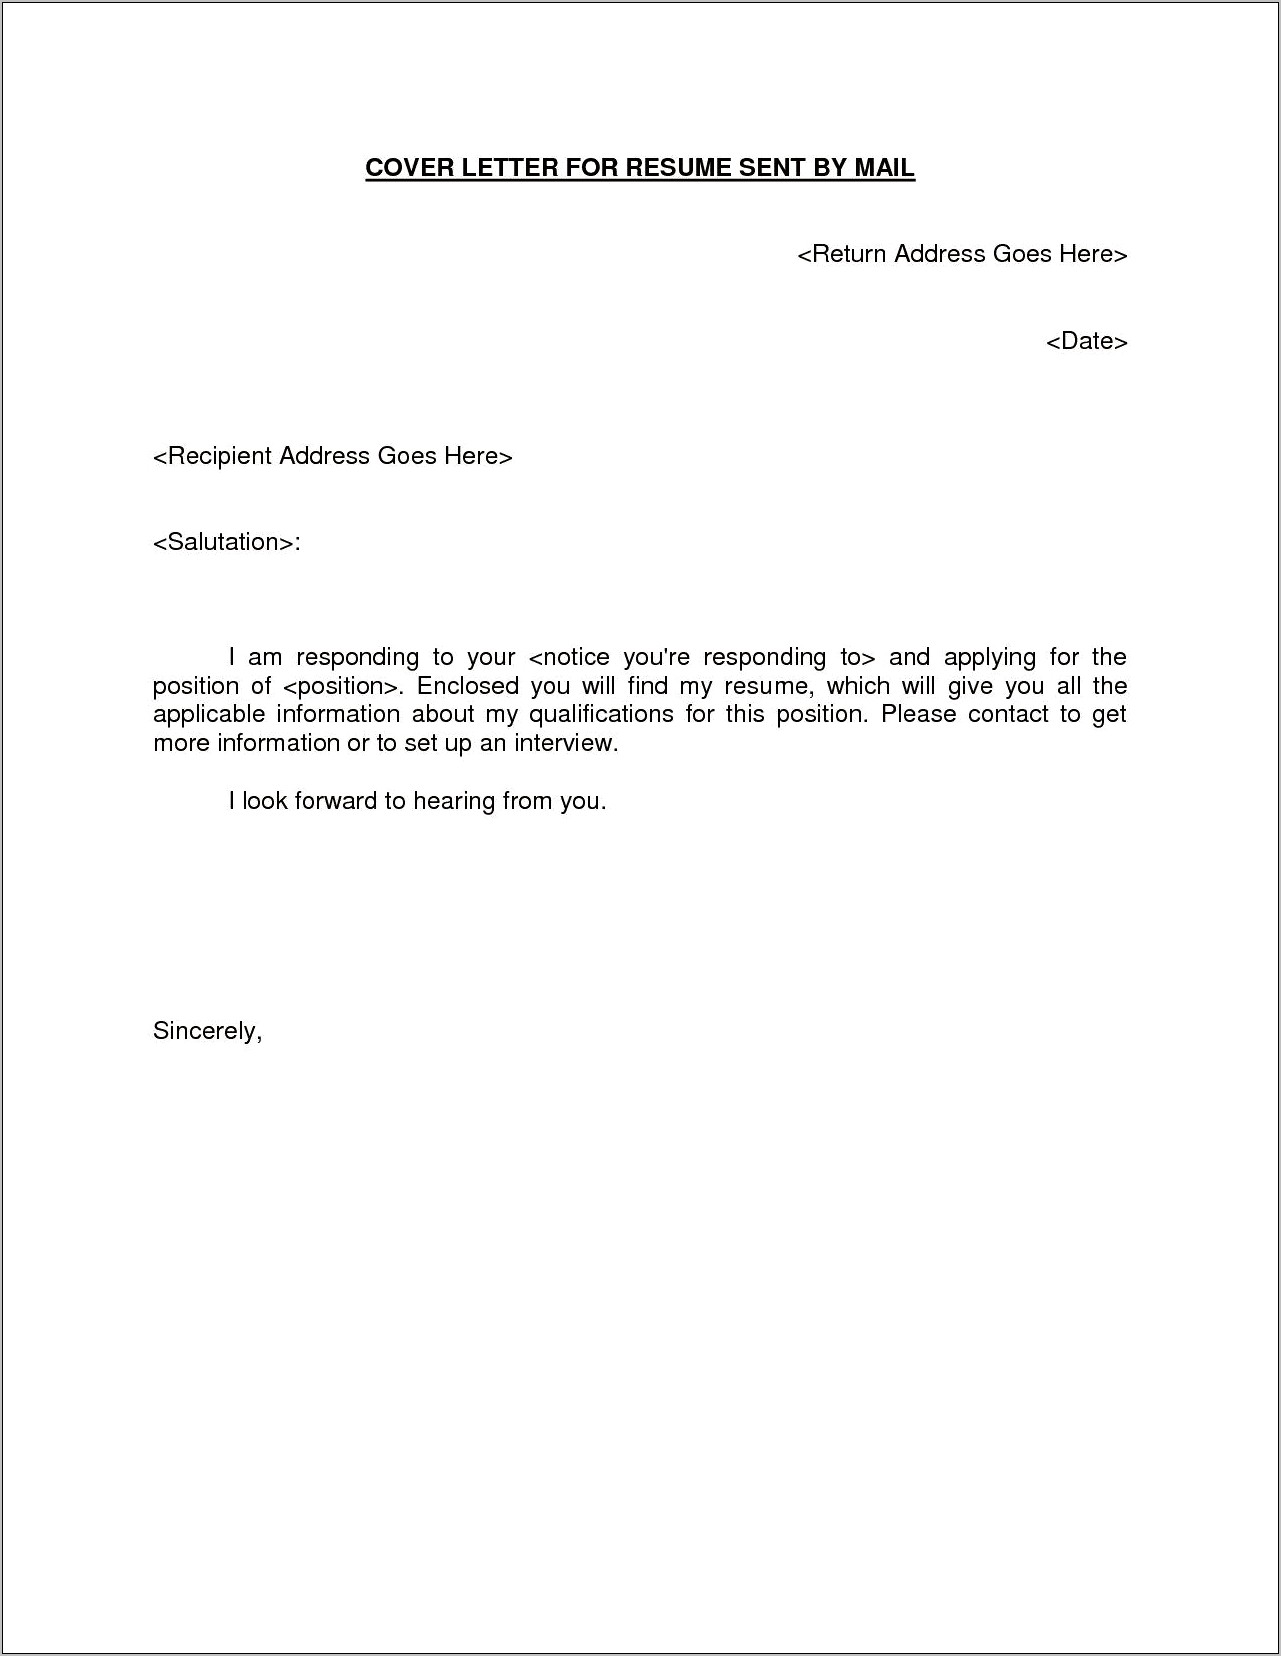 Email Cover Letter Format For Resume